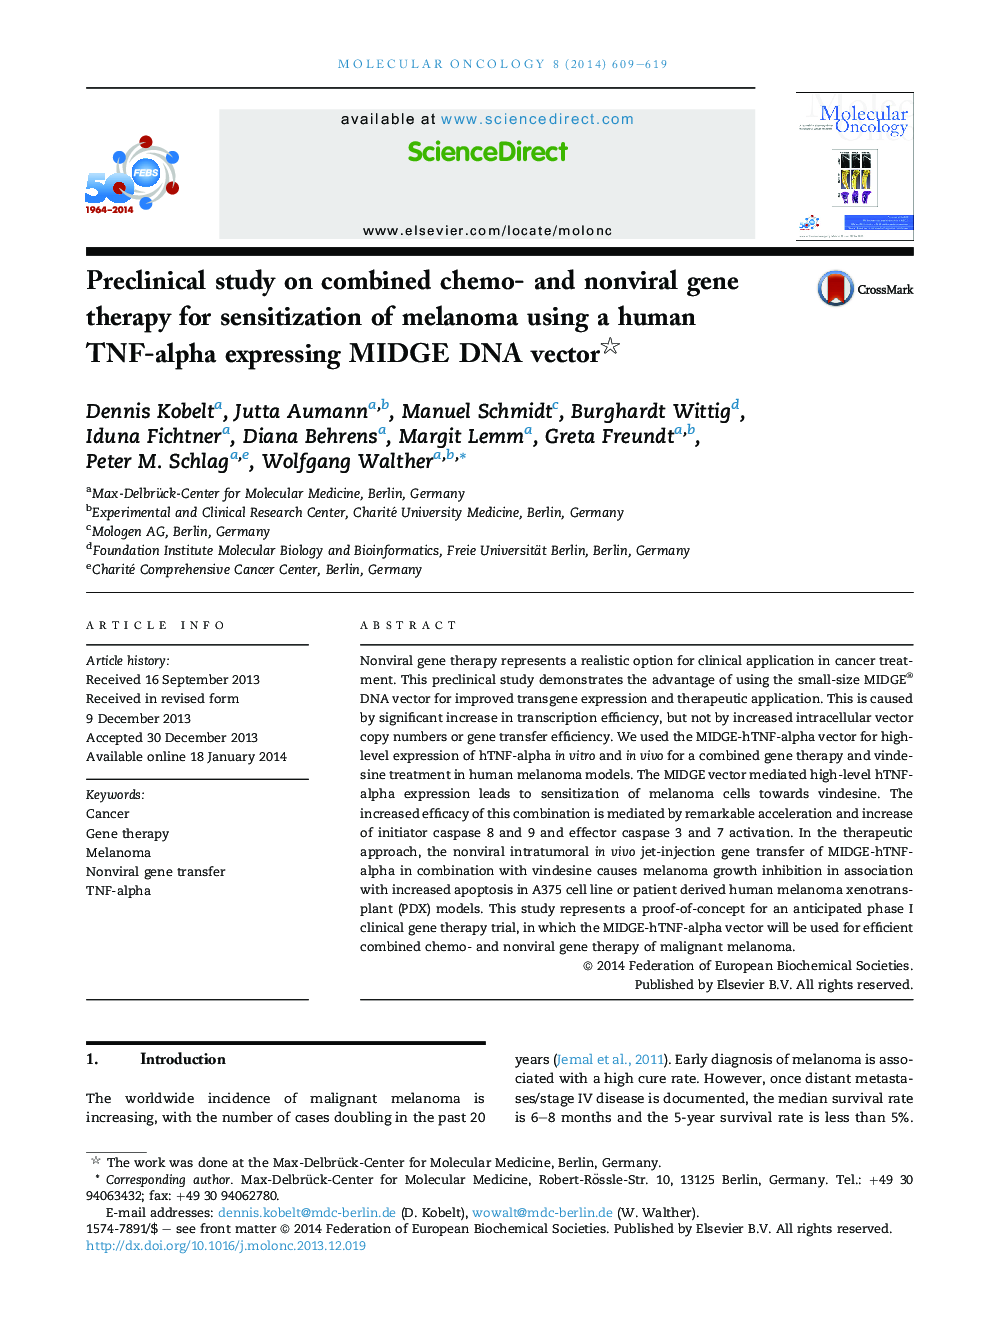 Preclinical study on combined chemo- and nonviral gene therapy for sensitization of melanoma using a human TNF-alpha expressing MIDGE DNA vector